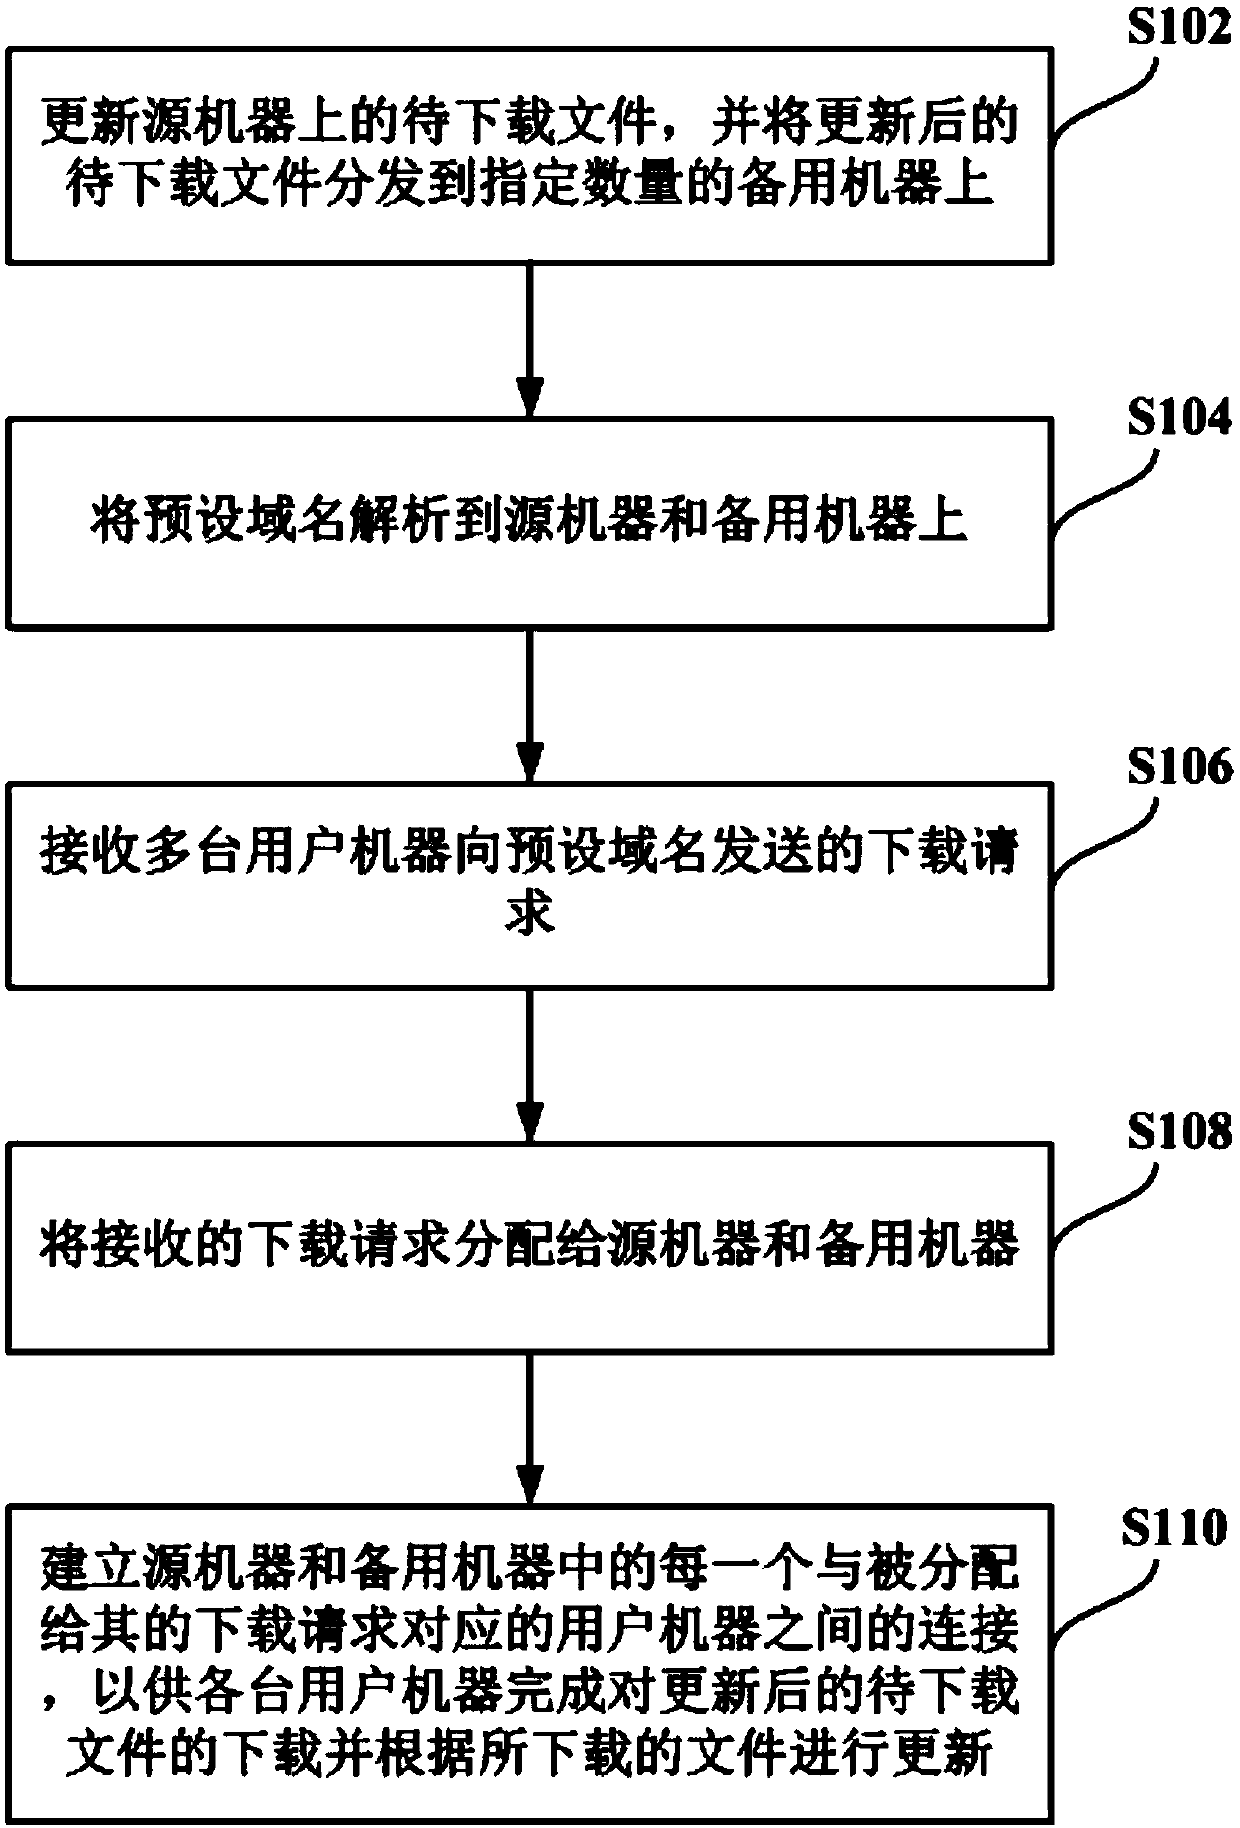 File processing method and device based on multi-user machine